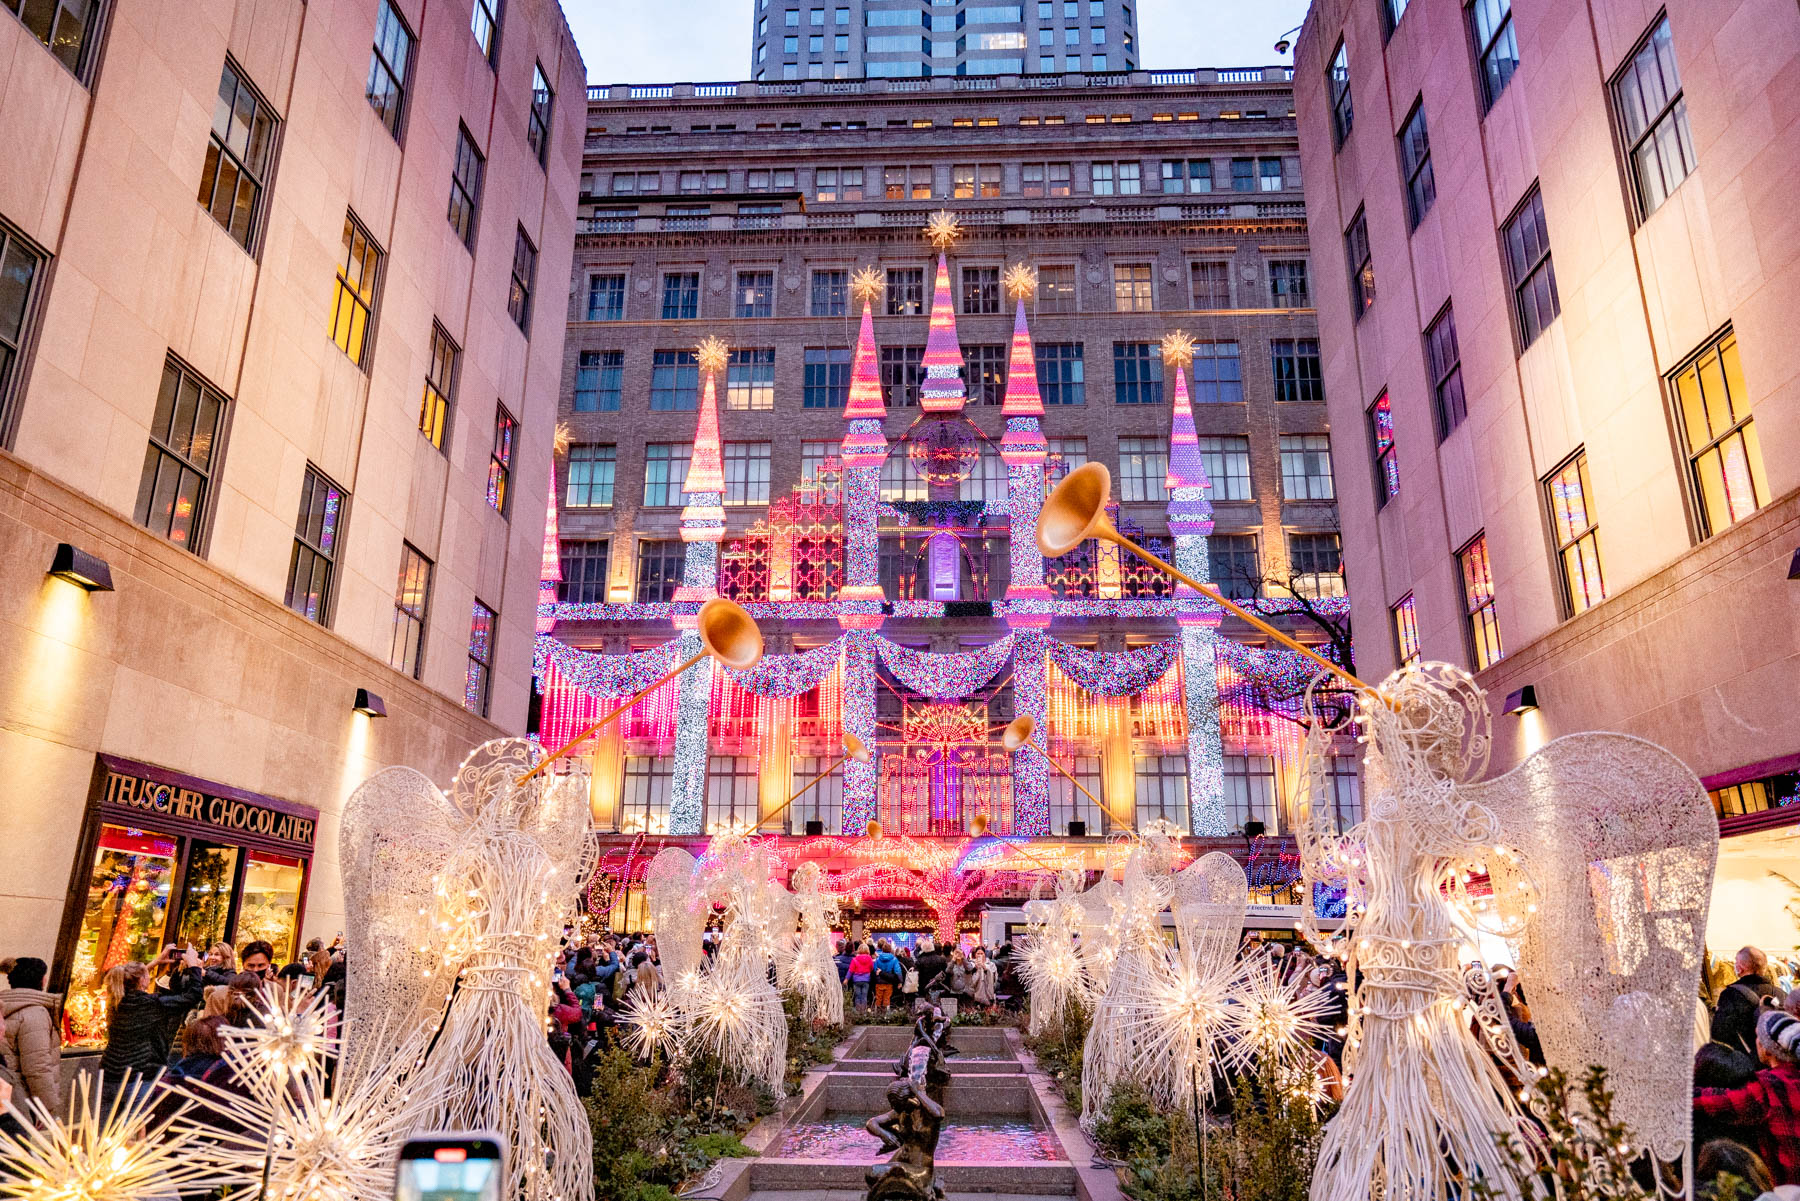 Saks Fifth Light Show
Christmas Shows in NYC
Christmas in New York City